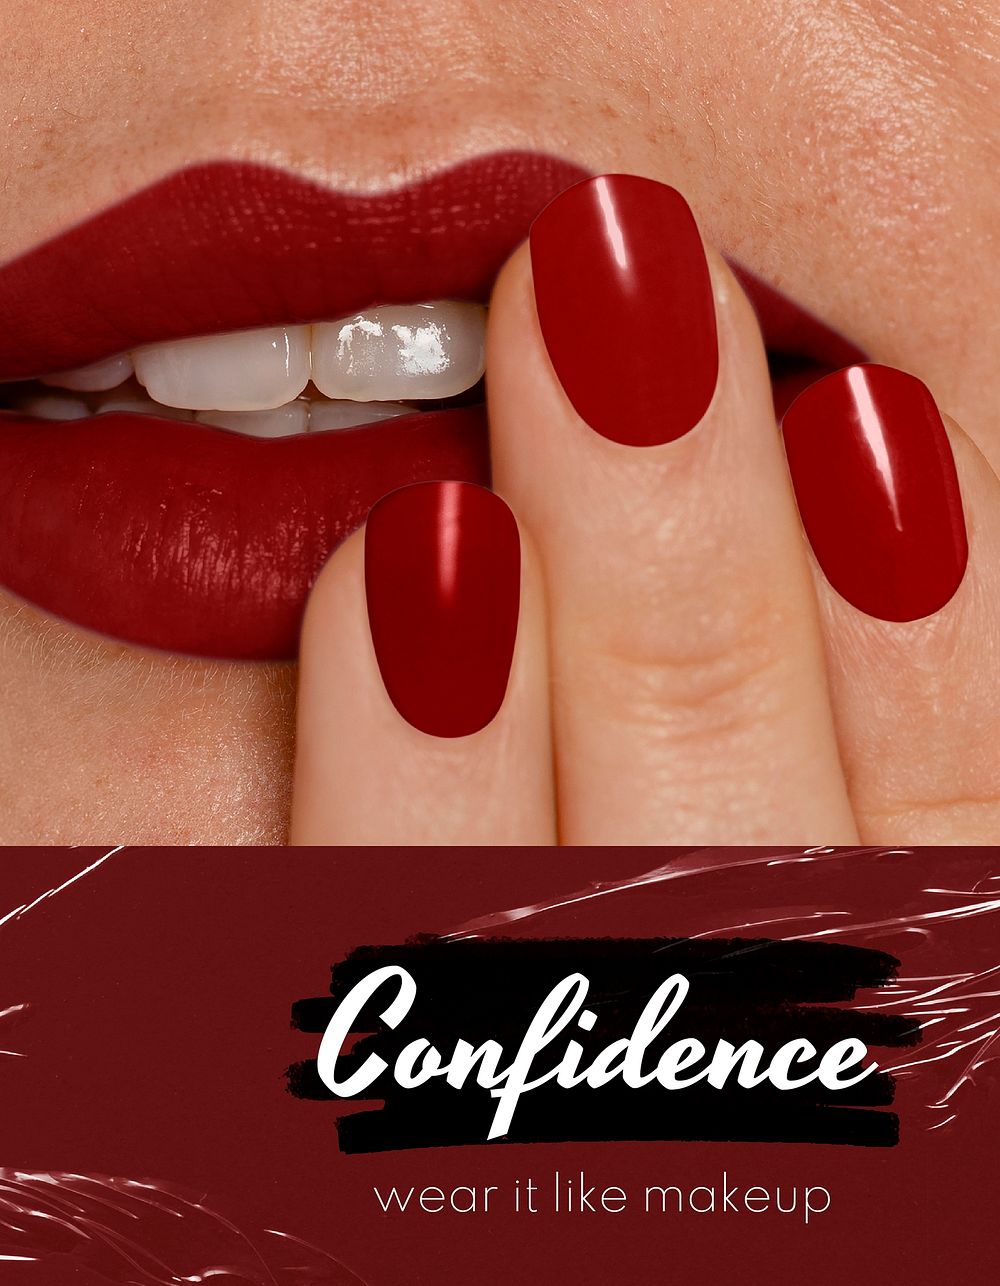 Red lips flyer template, confidence text psd